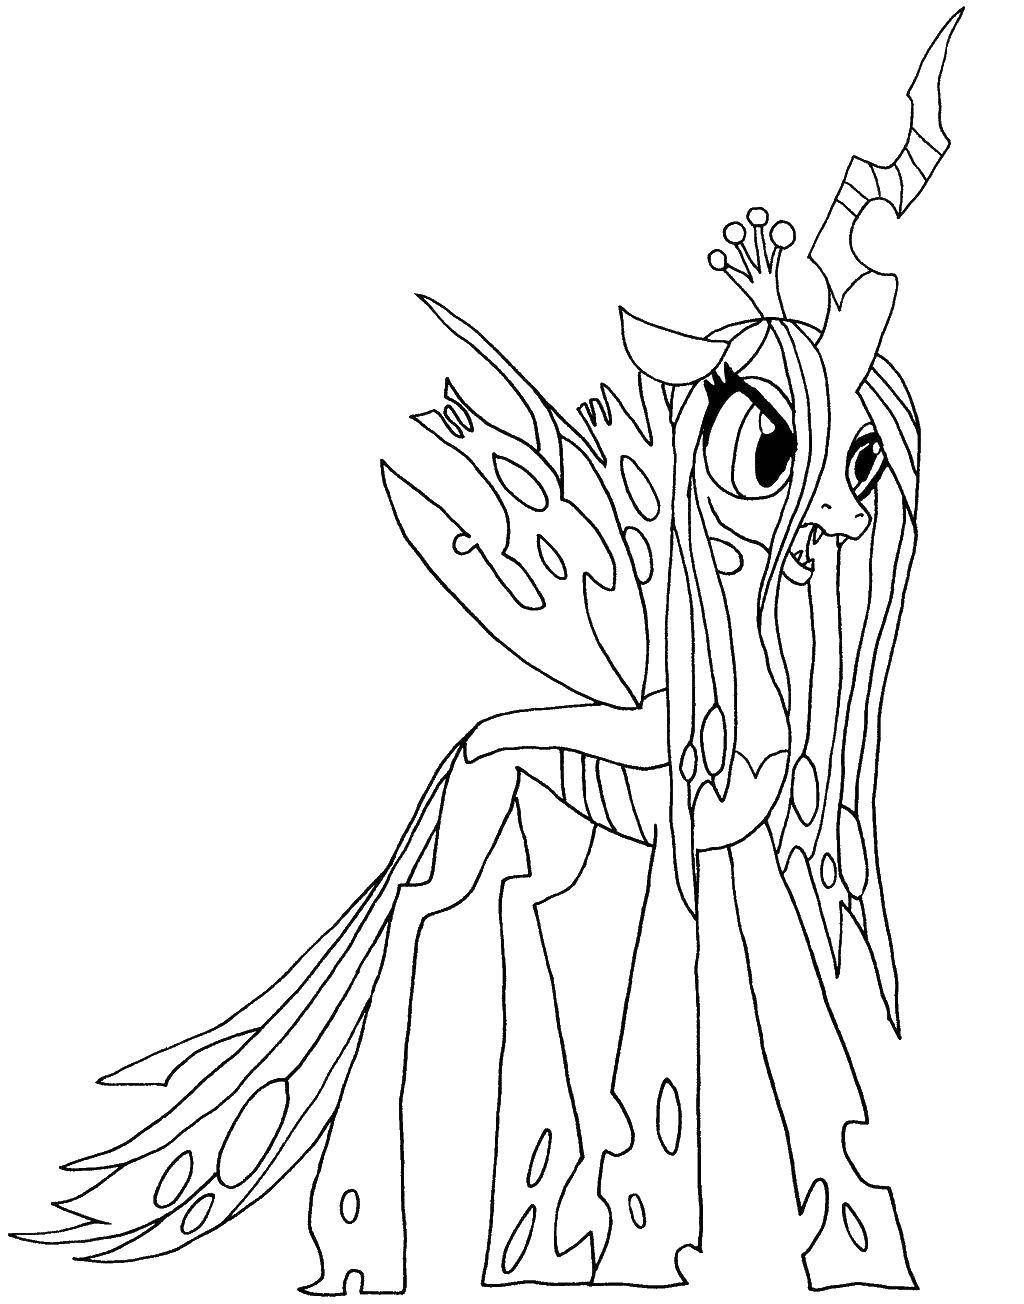 Coloring Unicorn. Category Ponies. Tags:  pony tale, girls, unicorn.